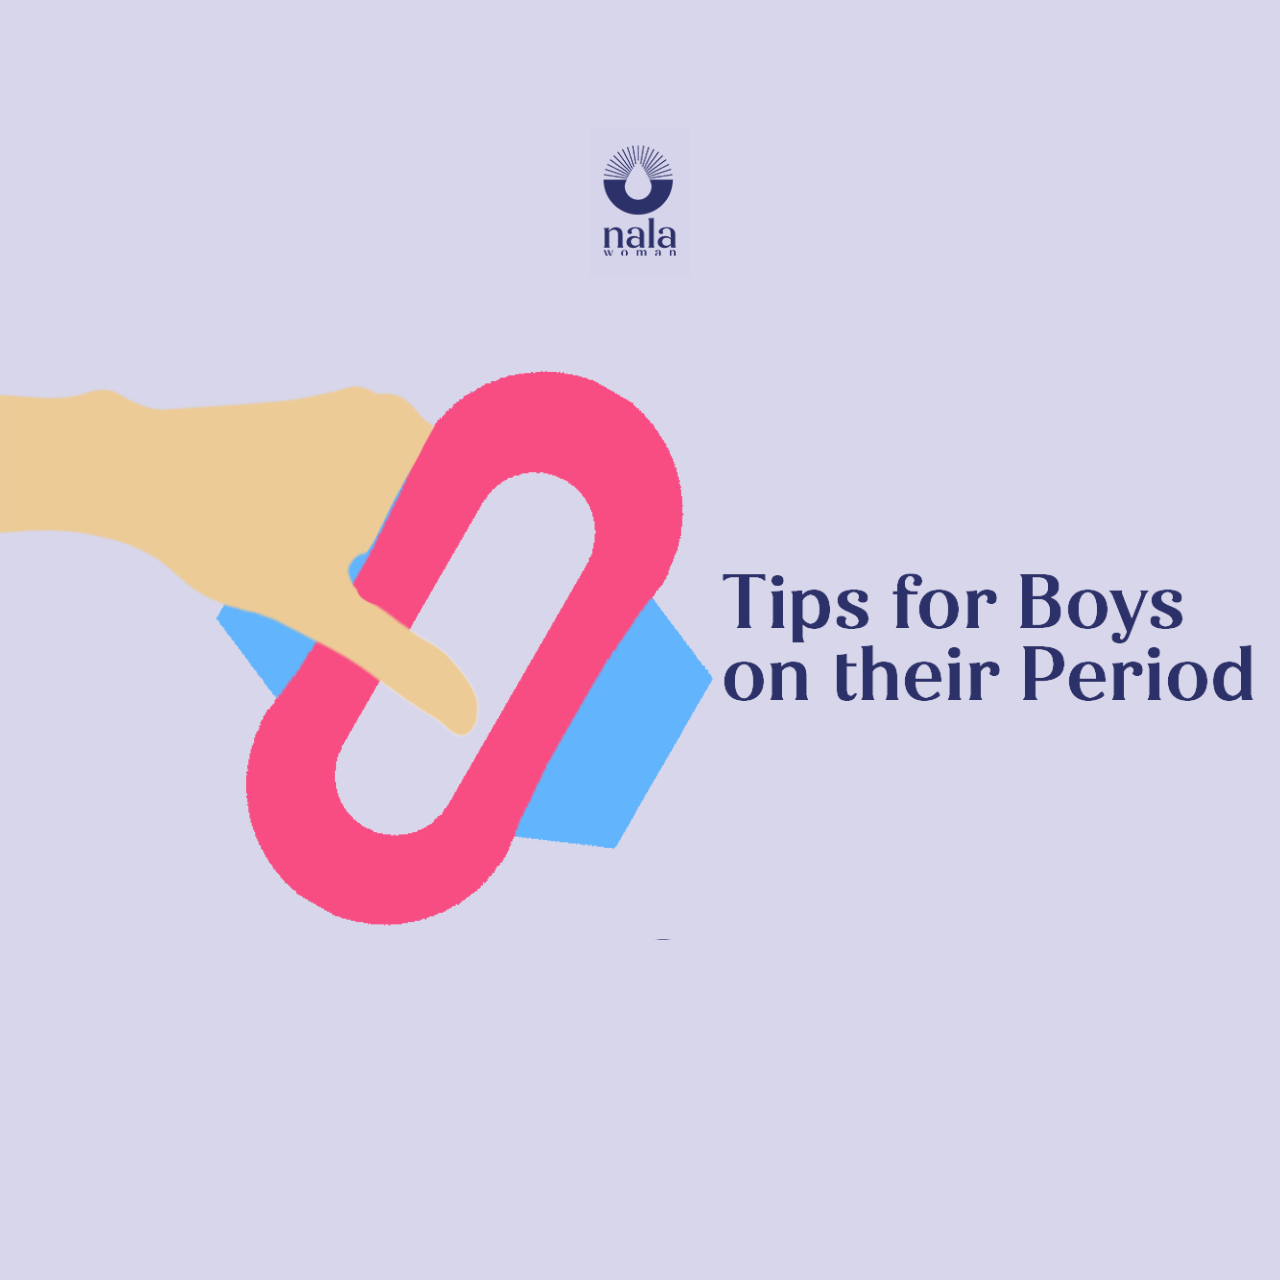 Tips For Boys on their Period